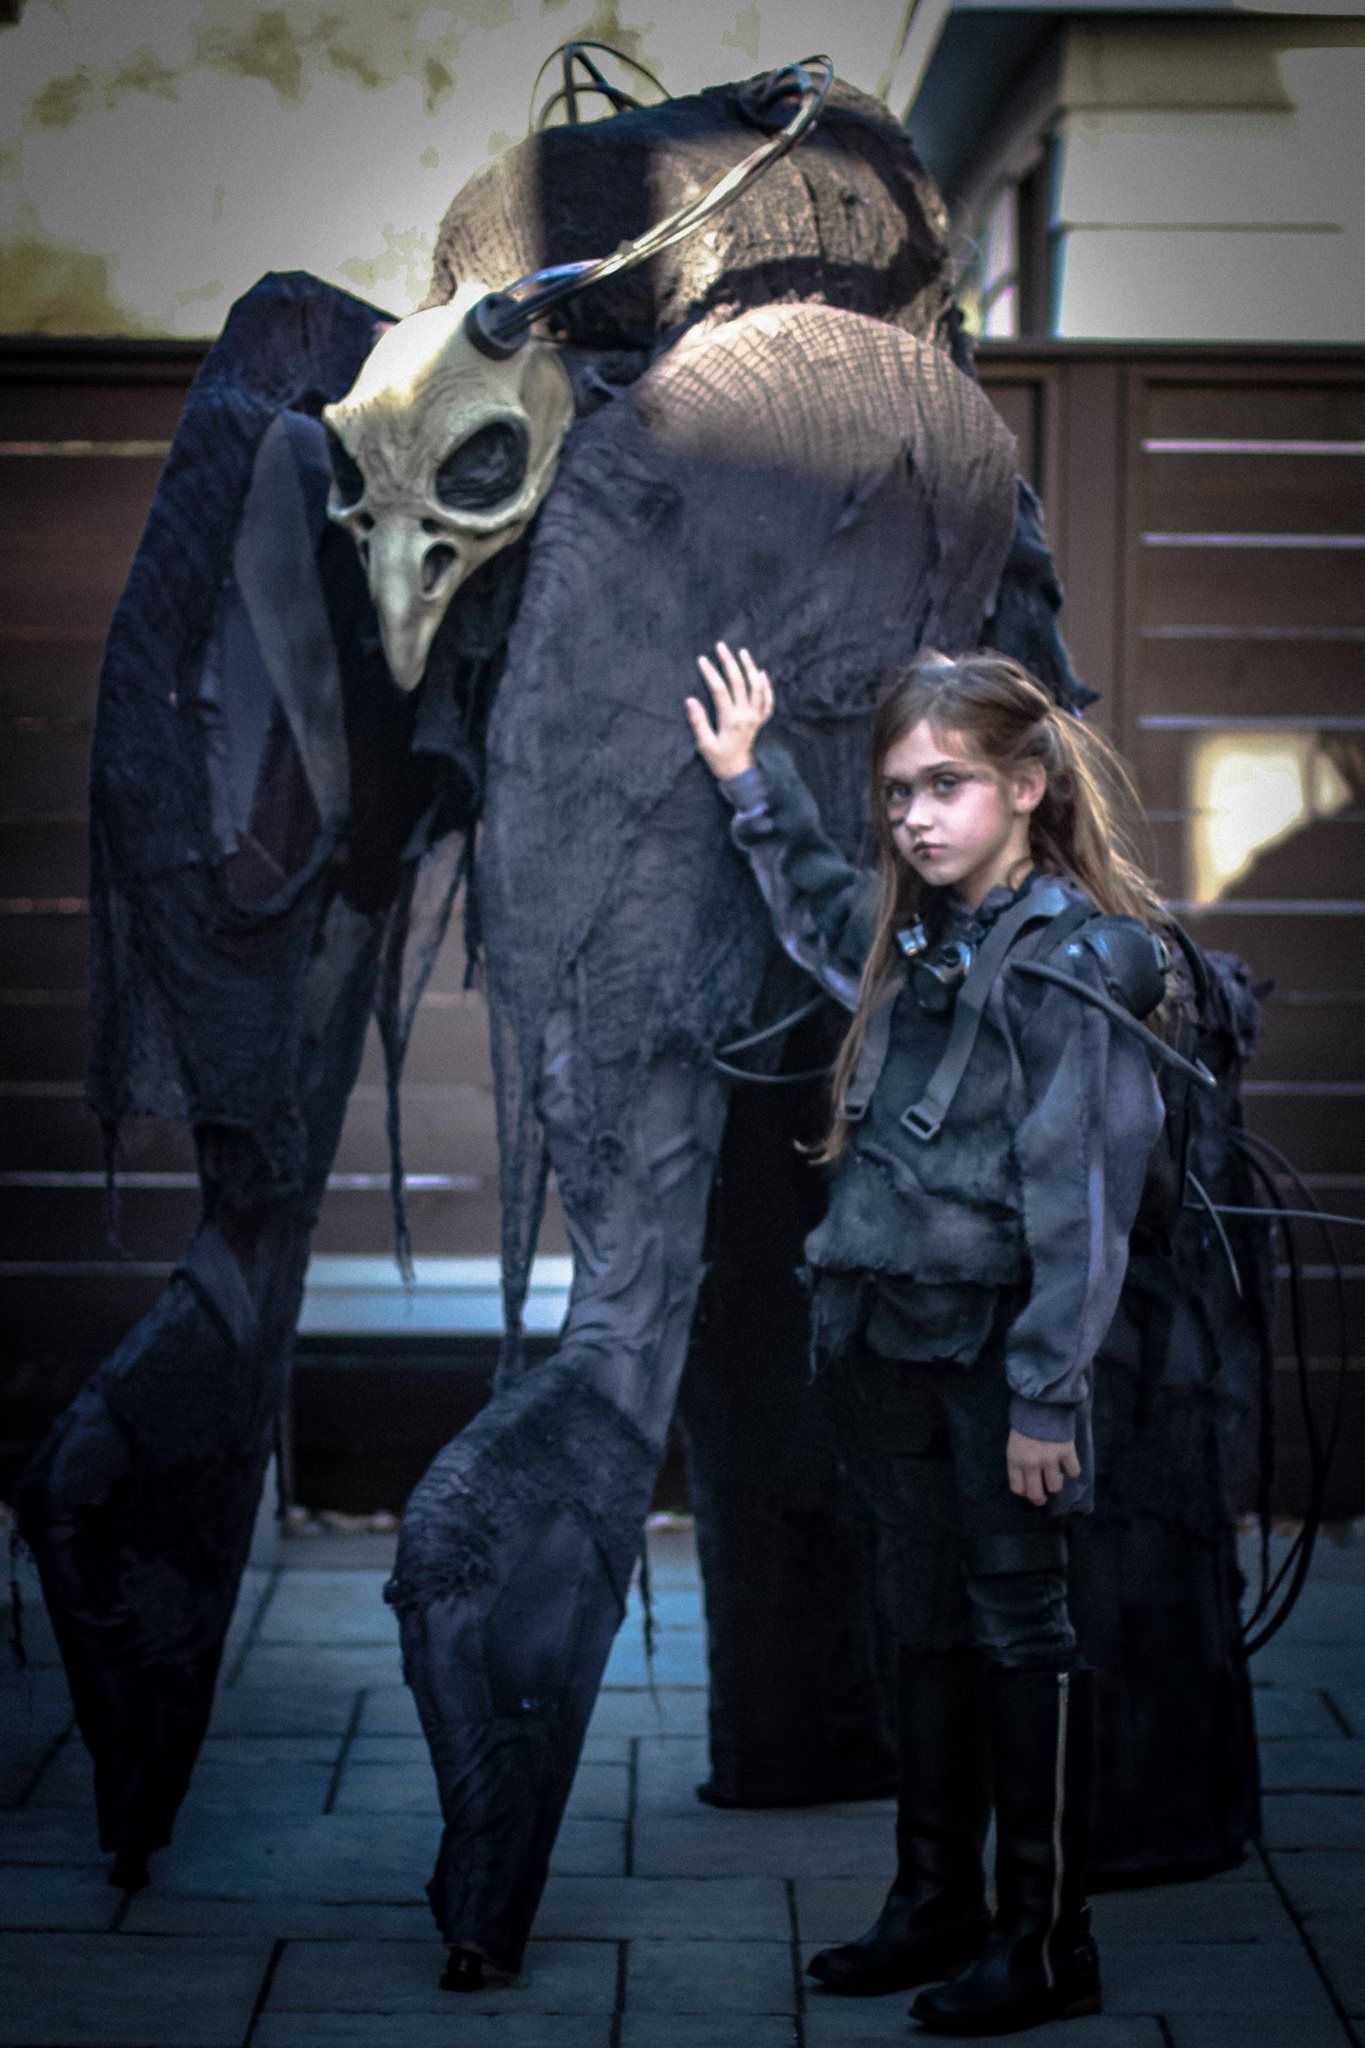 My daughter and I are ready to terrorize the neighborhood again this Halloween.